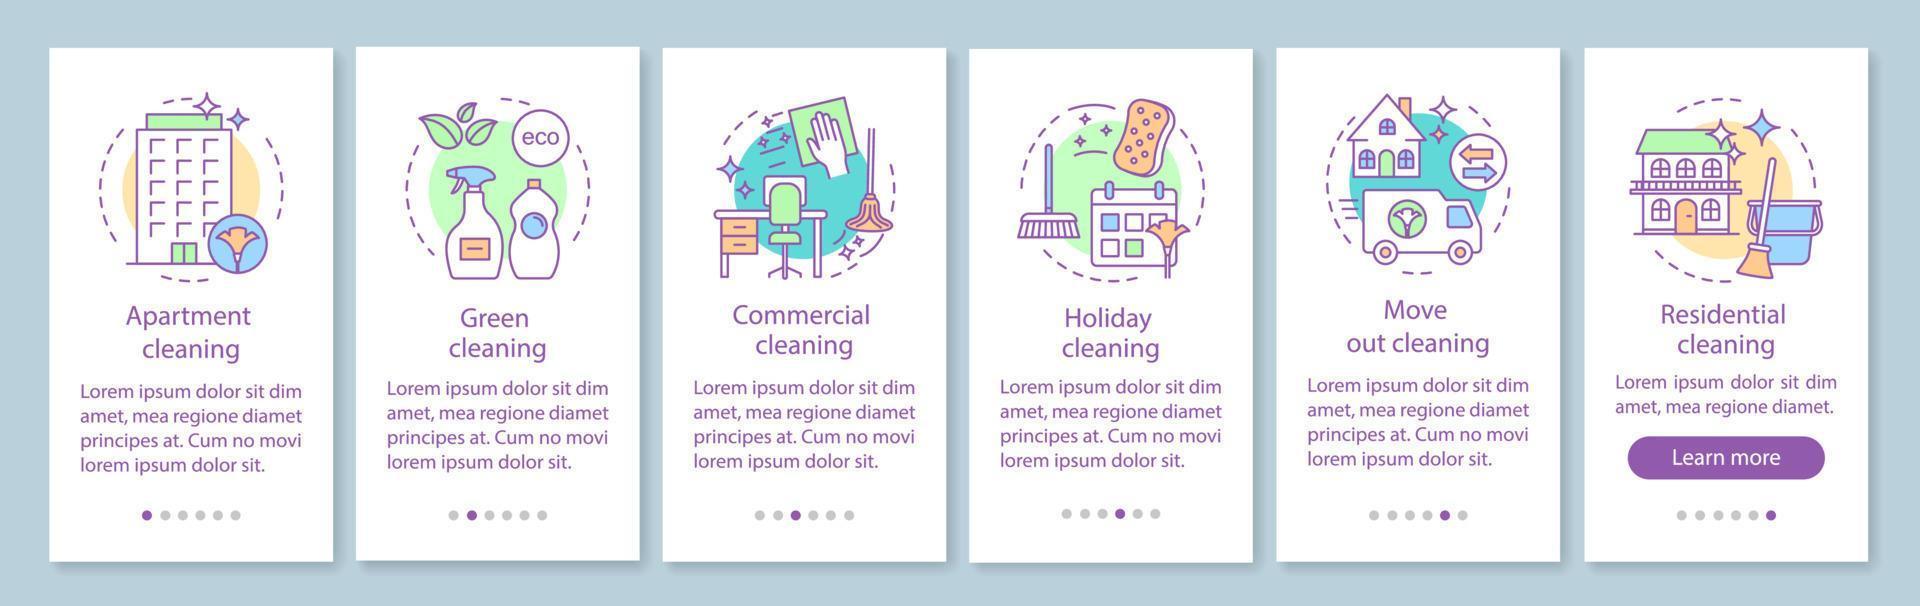 Cleaning services onboarding mobile app page screen, linear concepts. Commercial, holiday, move out cleanup. Six walkthrough steps graphic instructions. UX, UI, GUI vector template with illustrations